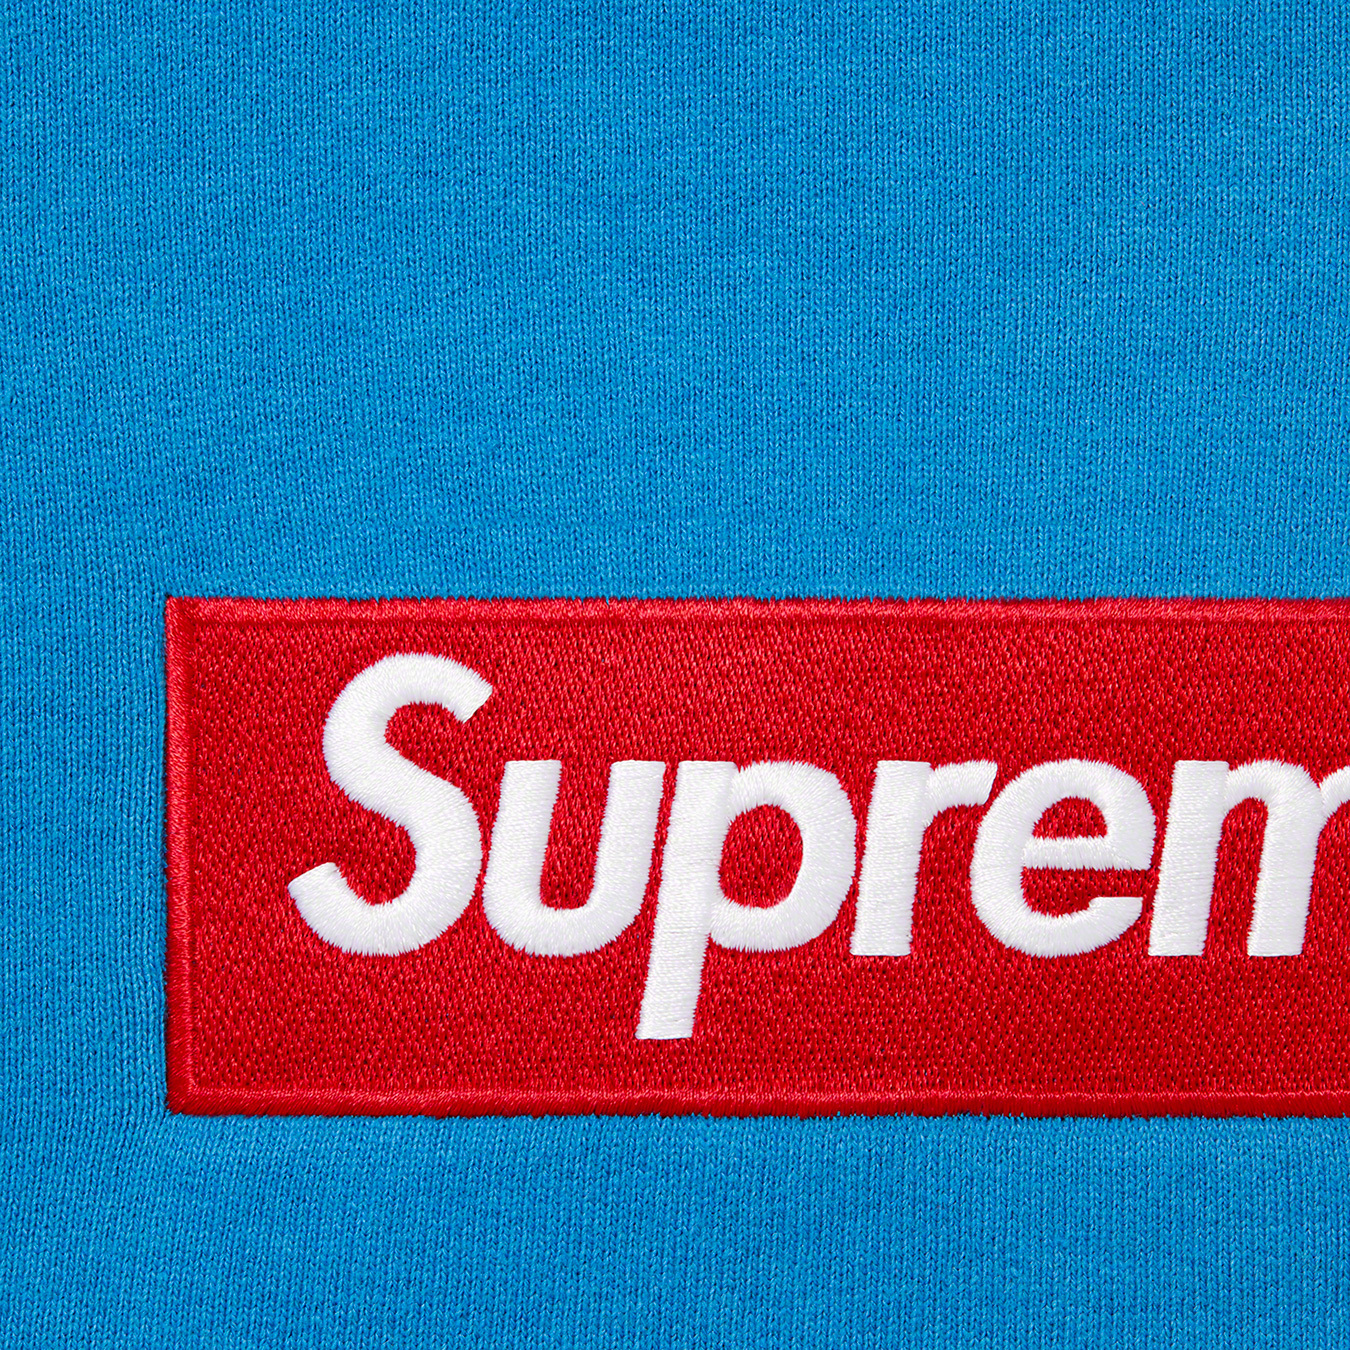 DropsByJay on X: Supreme FW22 Box Logo Crewneck Sweatshirt Your first look  at the Box Logo Crewneck Sweatshirt/Beanie which is expected to drop this  coming December. New set of colors to choose